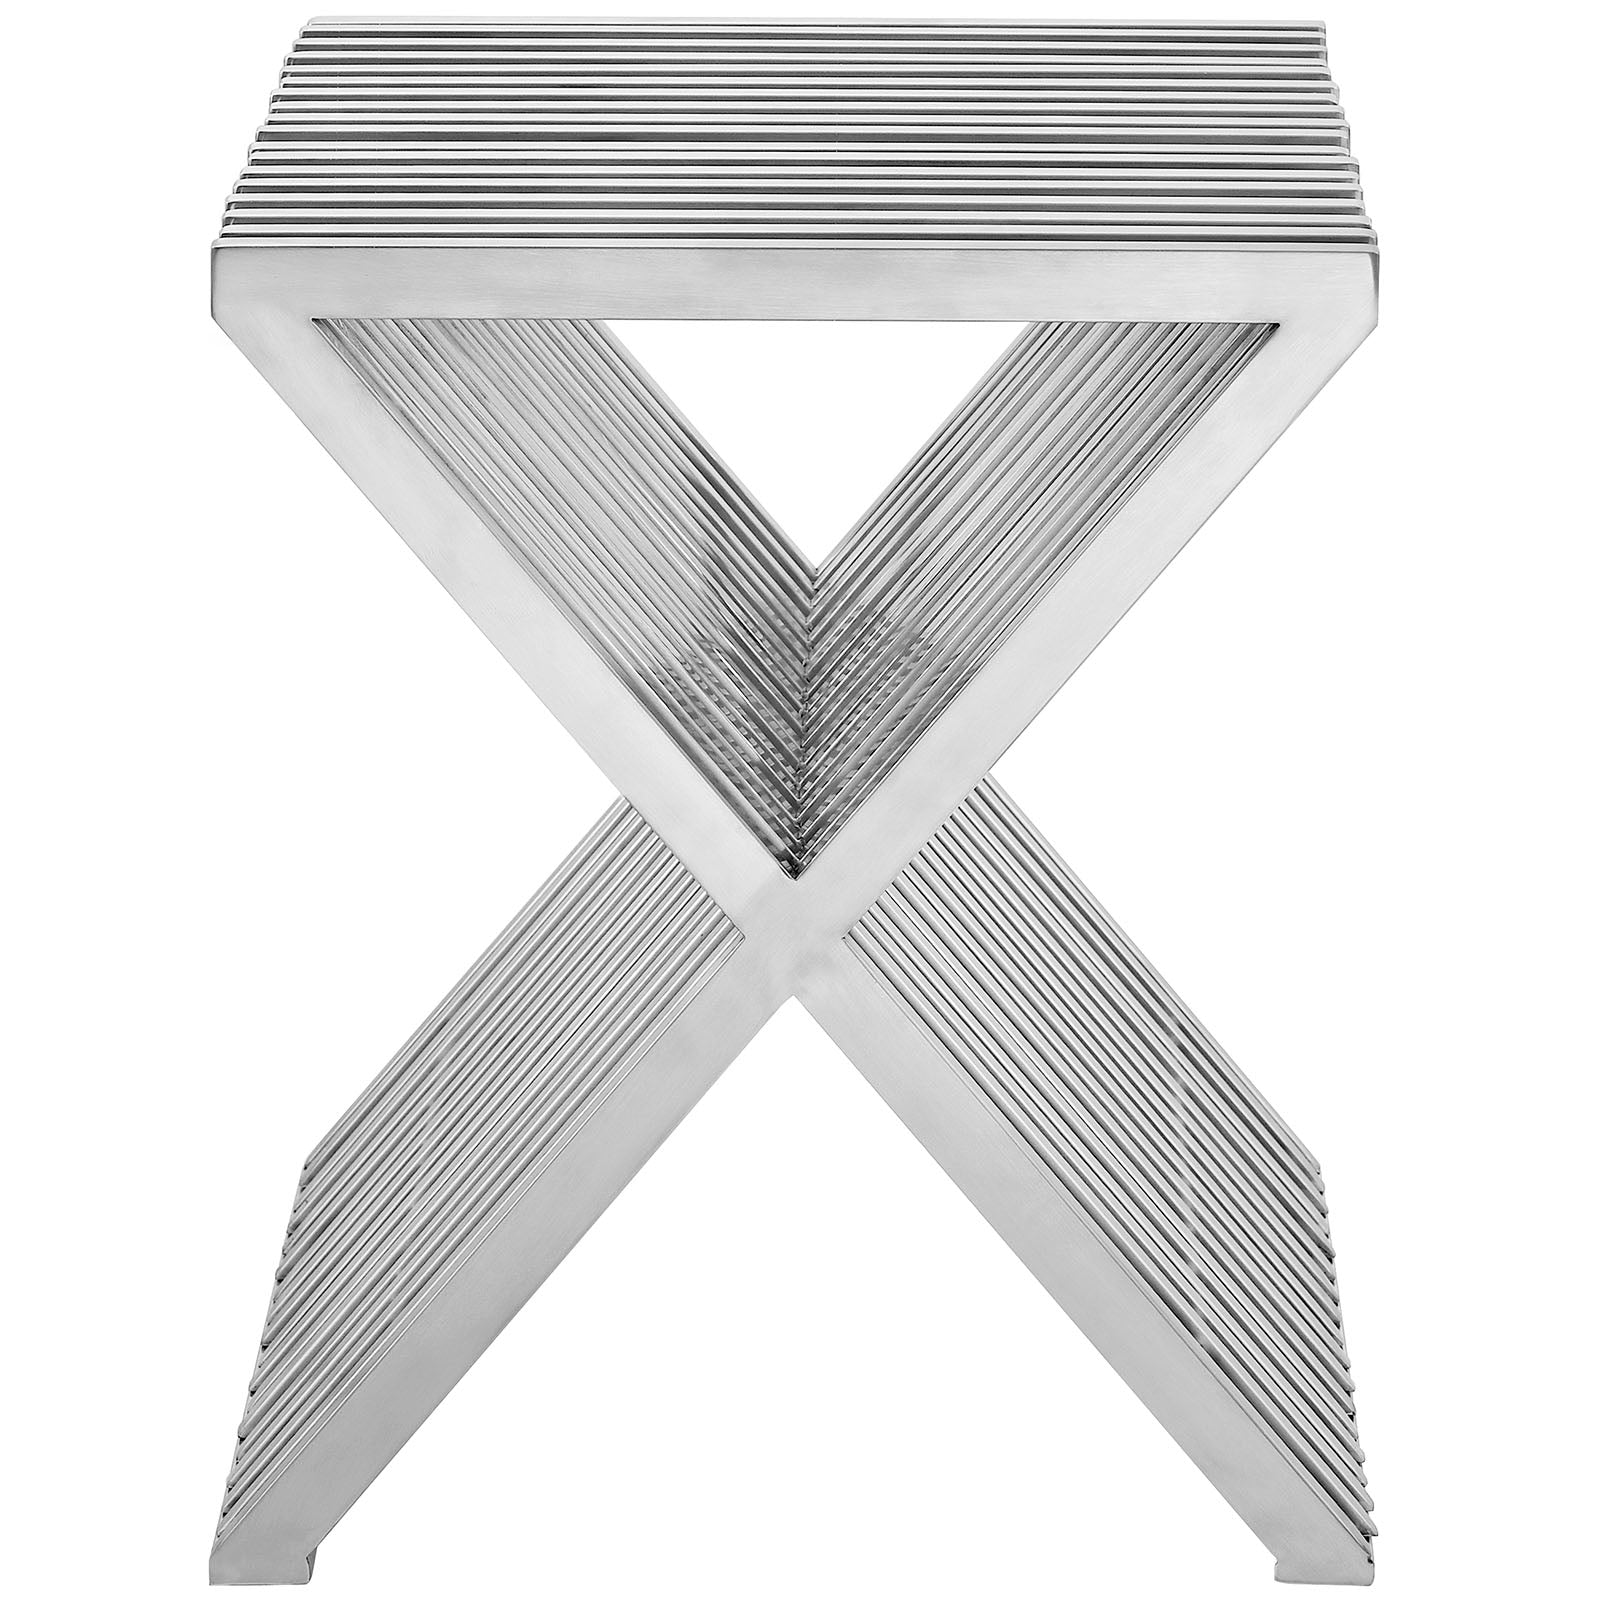 Press Stainless Steel Side Table - East Shore Modern Home Furnishings